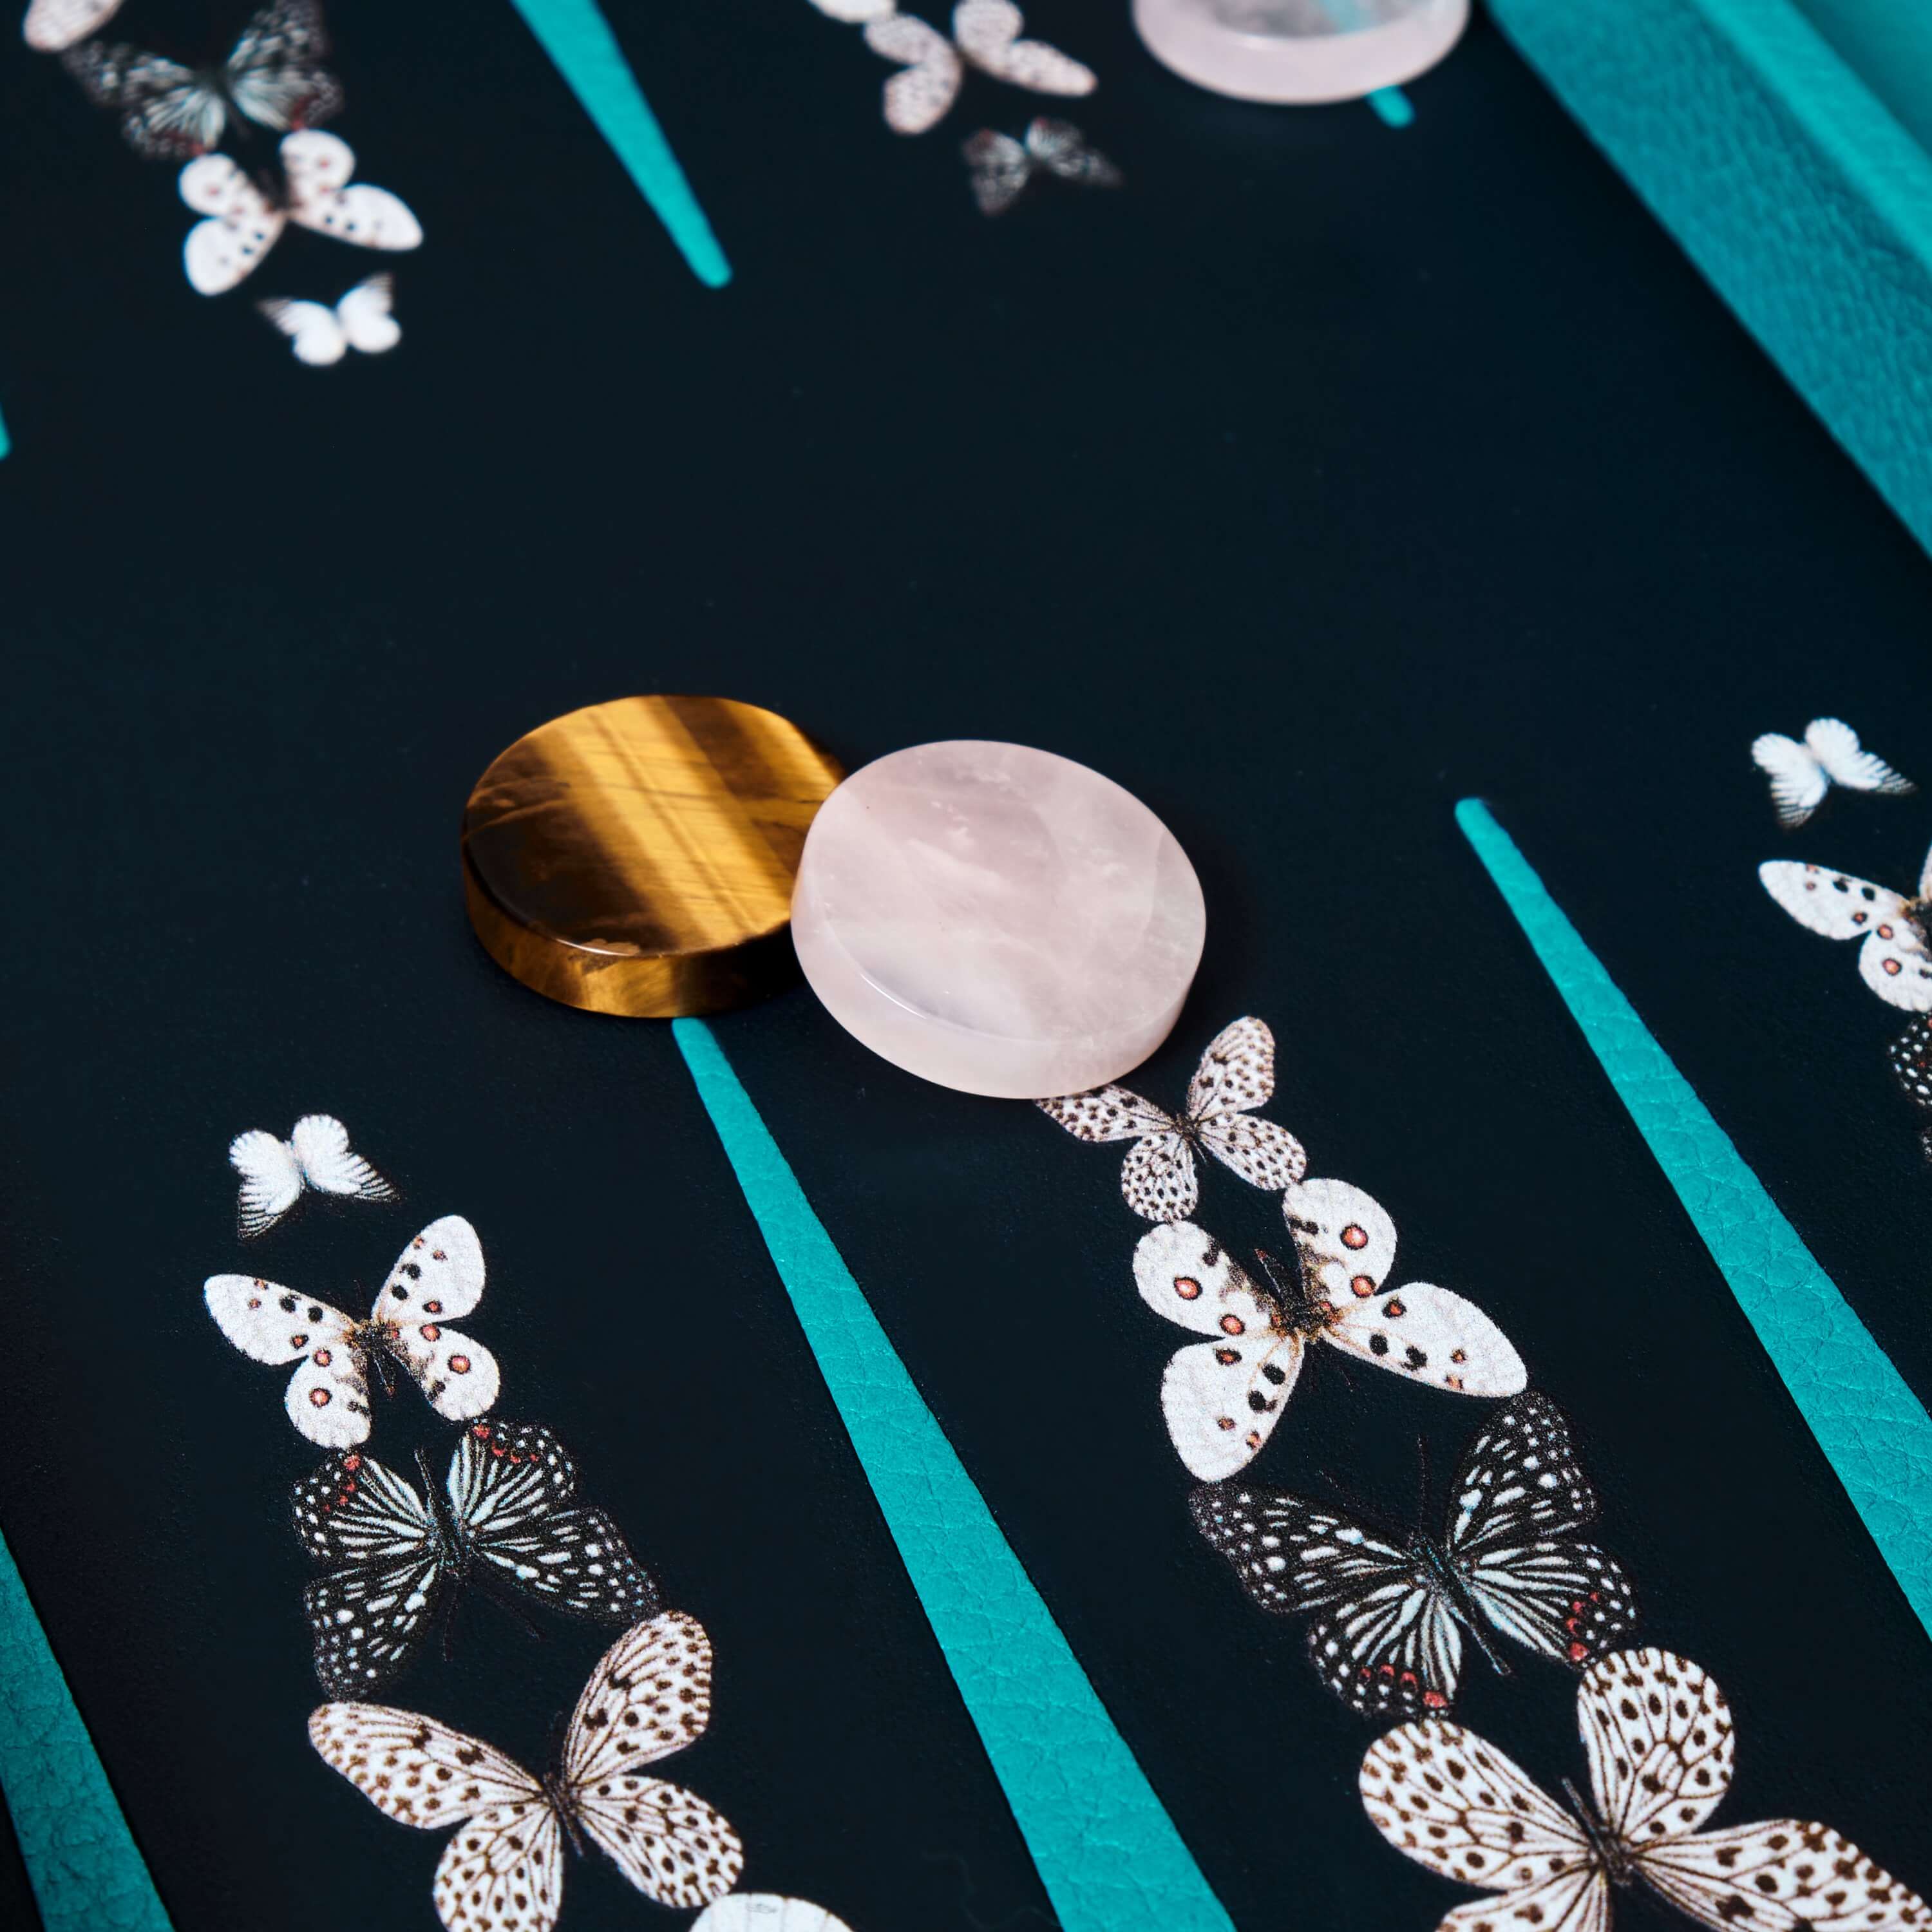 black and white butterfly travel backgammon set with rose quartz and tiger eye playing pieces